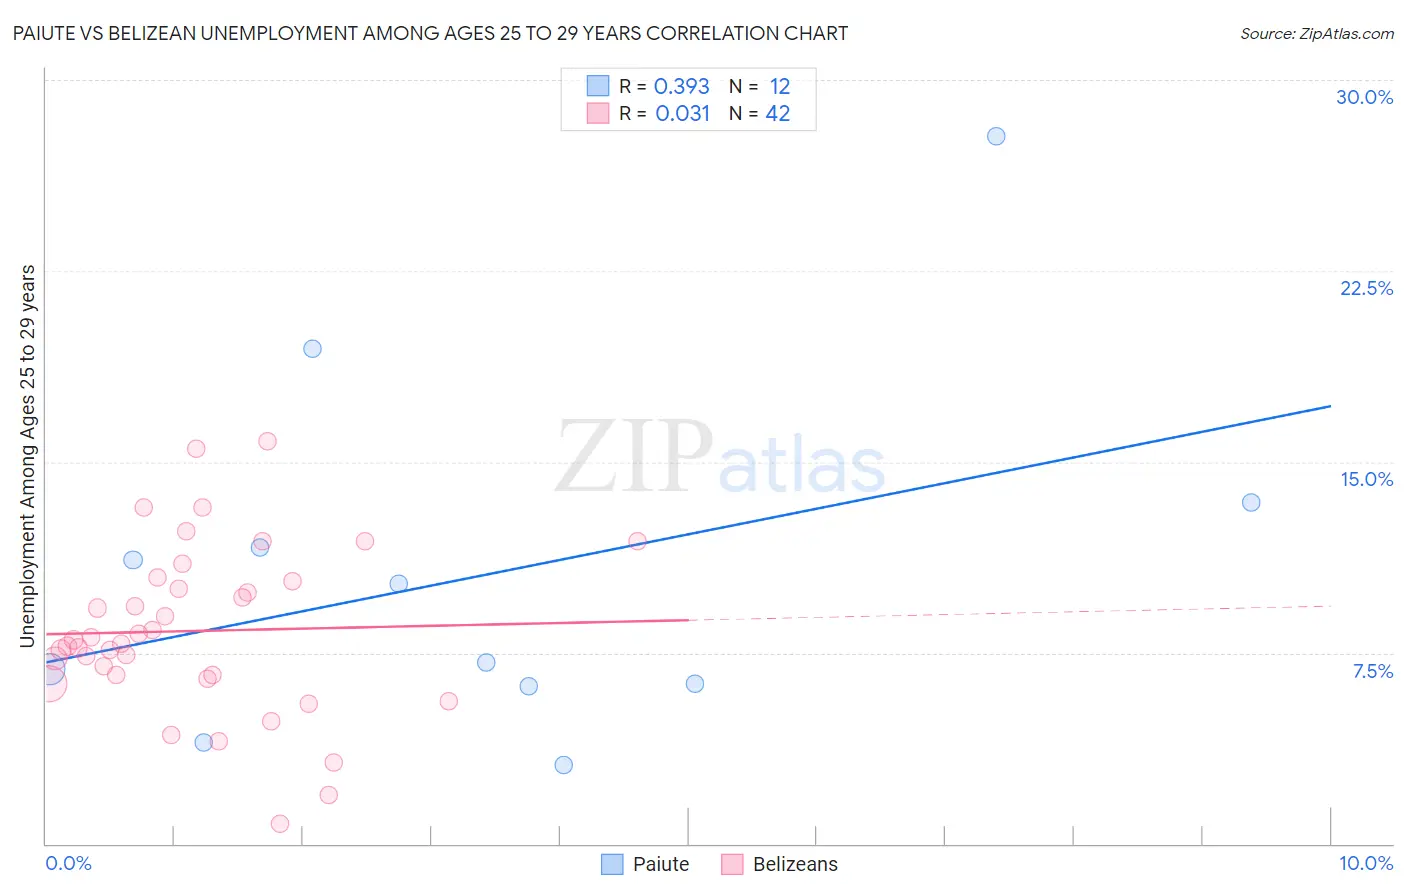 Paiute vs Belizean Unemployment Among Ages 25 to 29 years